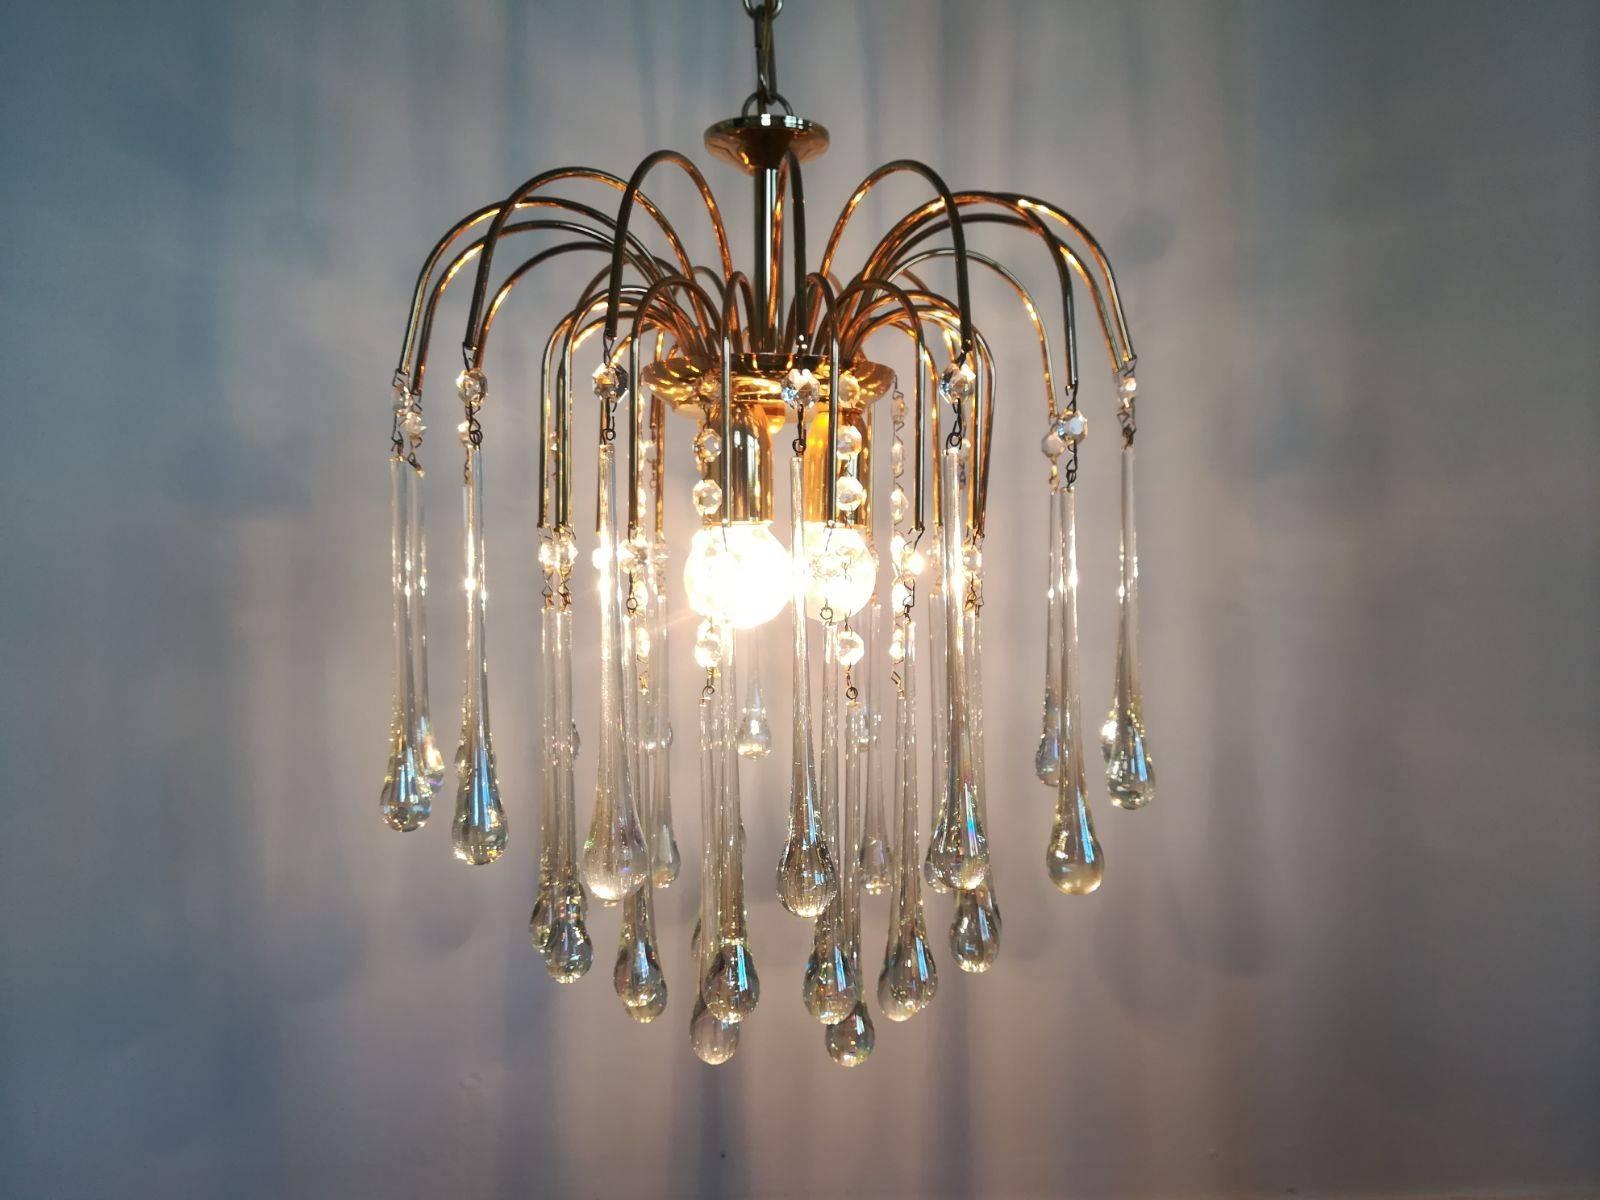 Stunning Venini 'teardrop' chandelier made of 32 crystal clear handmade Murano glass droplets and ice crystals hung on a brass frame.

It's like a fountain of lighted teardrops coming down on you.

Measurements: Height from bottom to ceiling 46